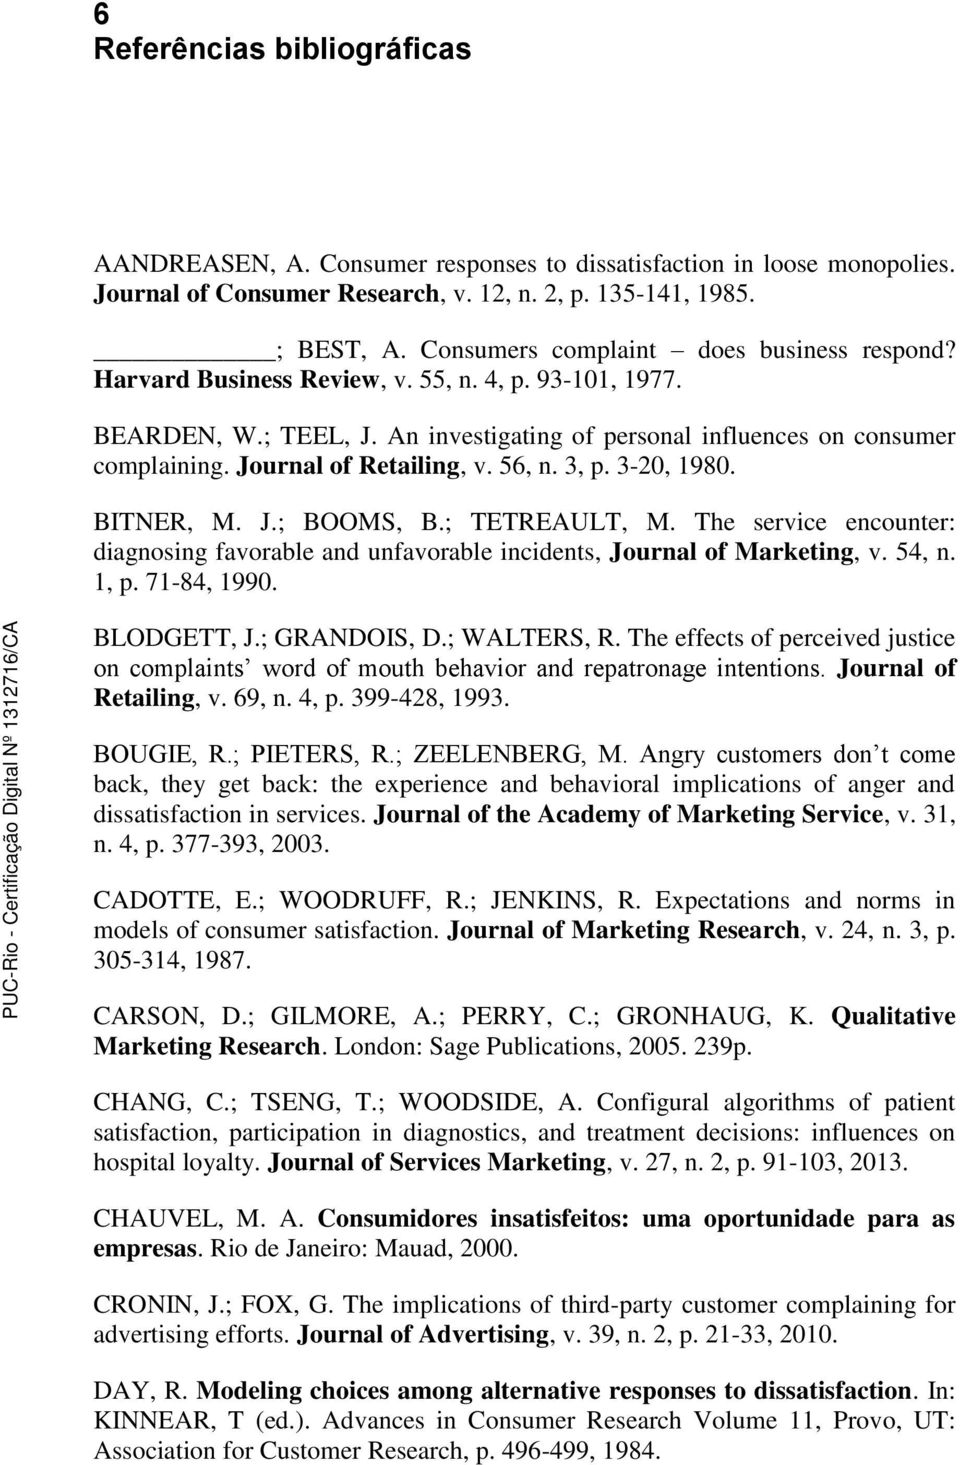 Journal of Retailing, v. 56, n. 3, p. 3-20, 1980. BITNER, M. J.; BOOMS, B.; TETREAULT, M. The service encounter: diagnosing favorable and unfavorable incidents, Journal of Marketing, v. 54, n. 1, p.